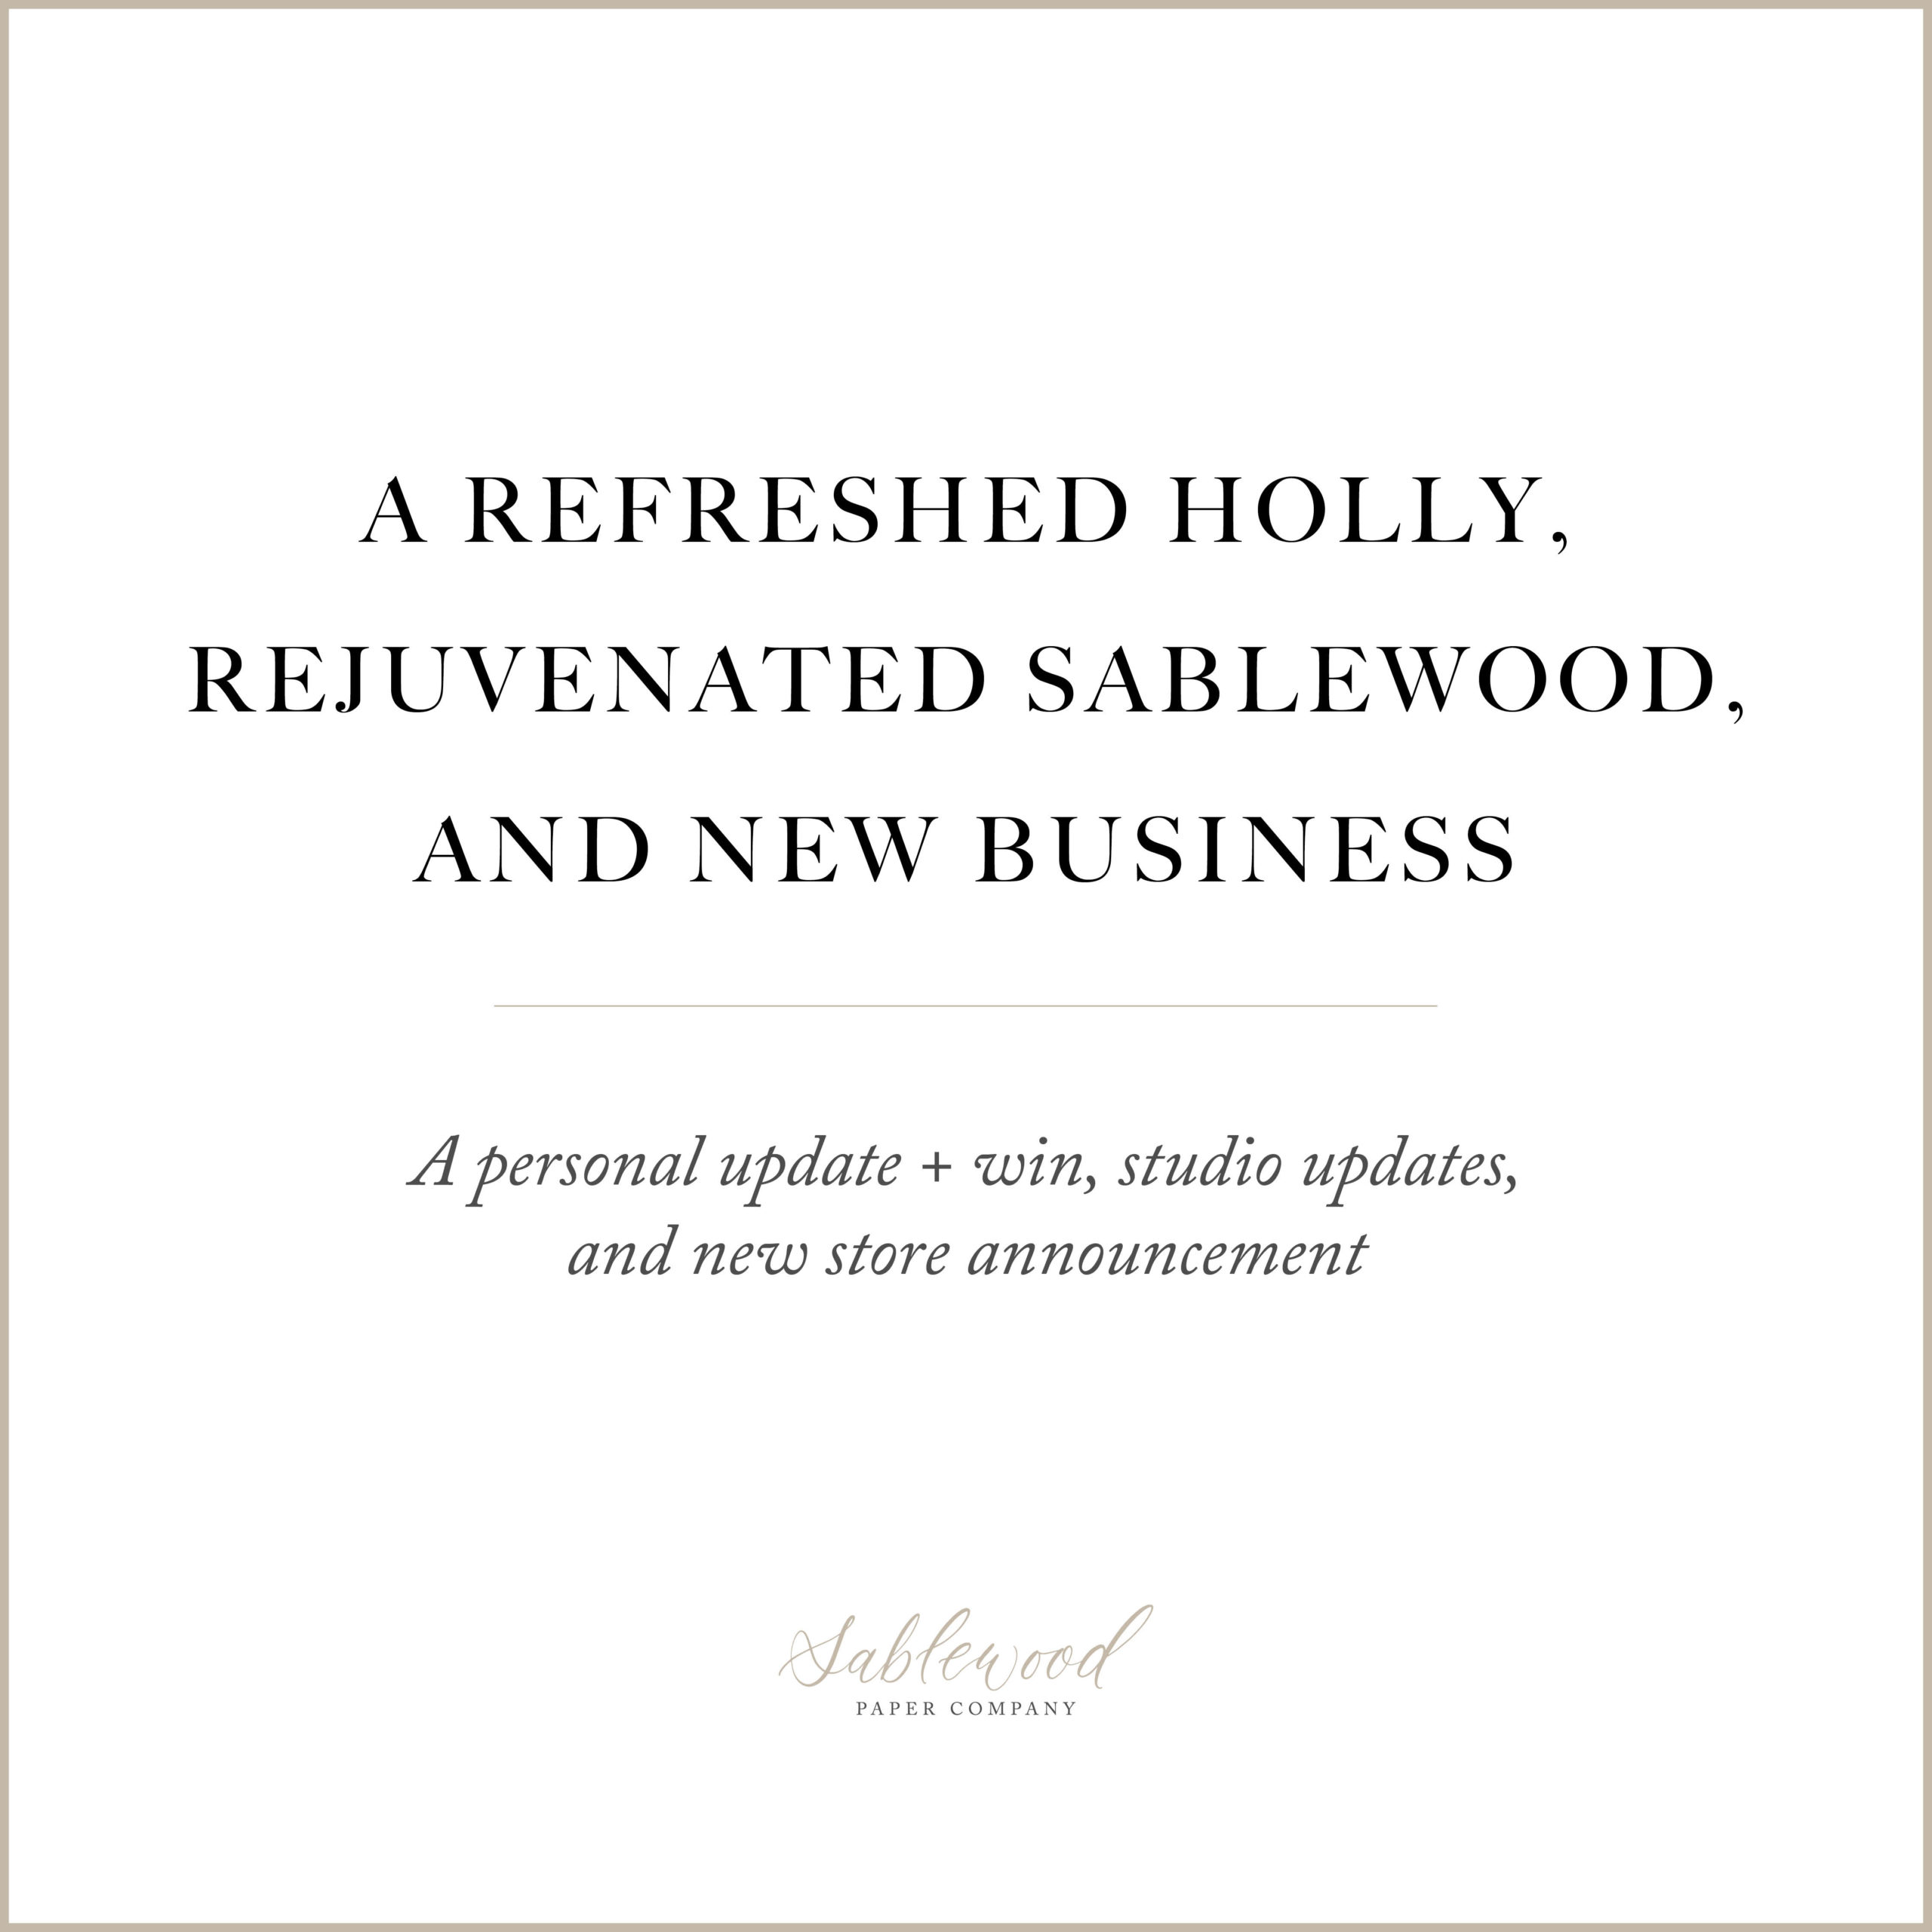 On the Blog: A Refreshed Holly, Rejuvenated Sablewood, and New Business